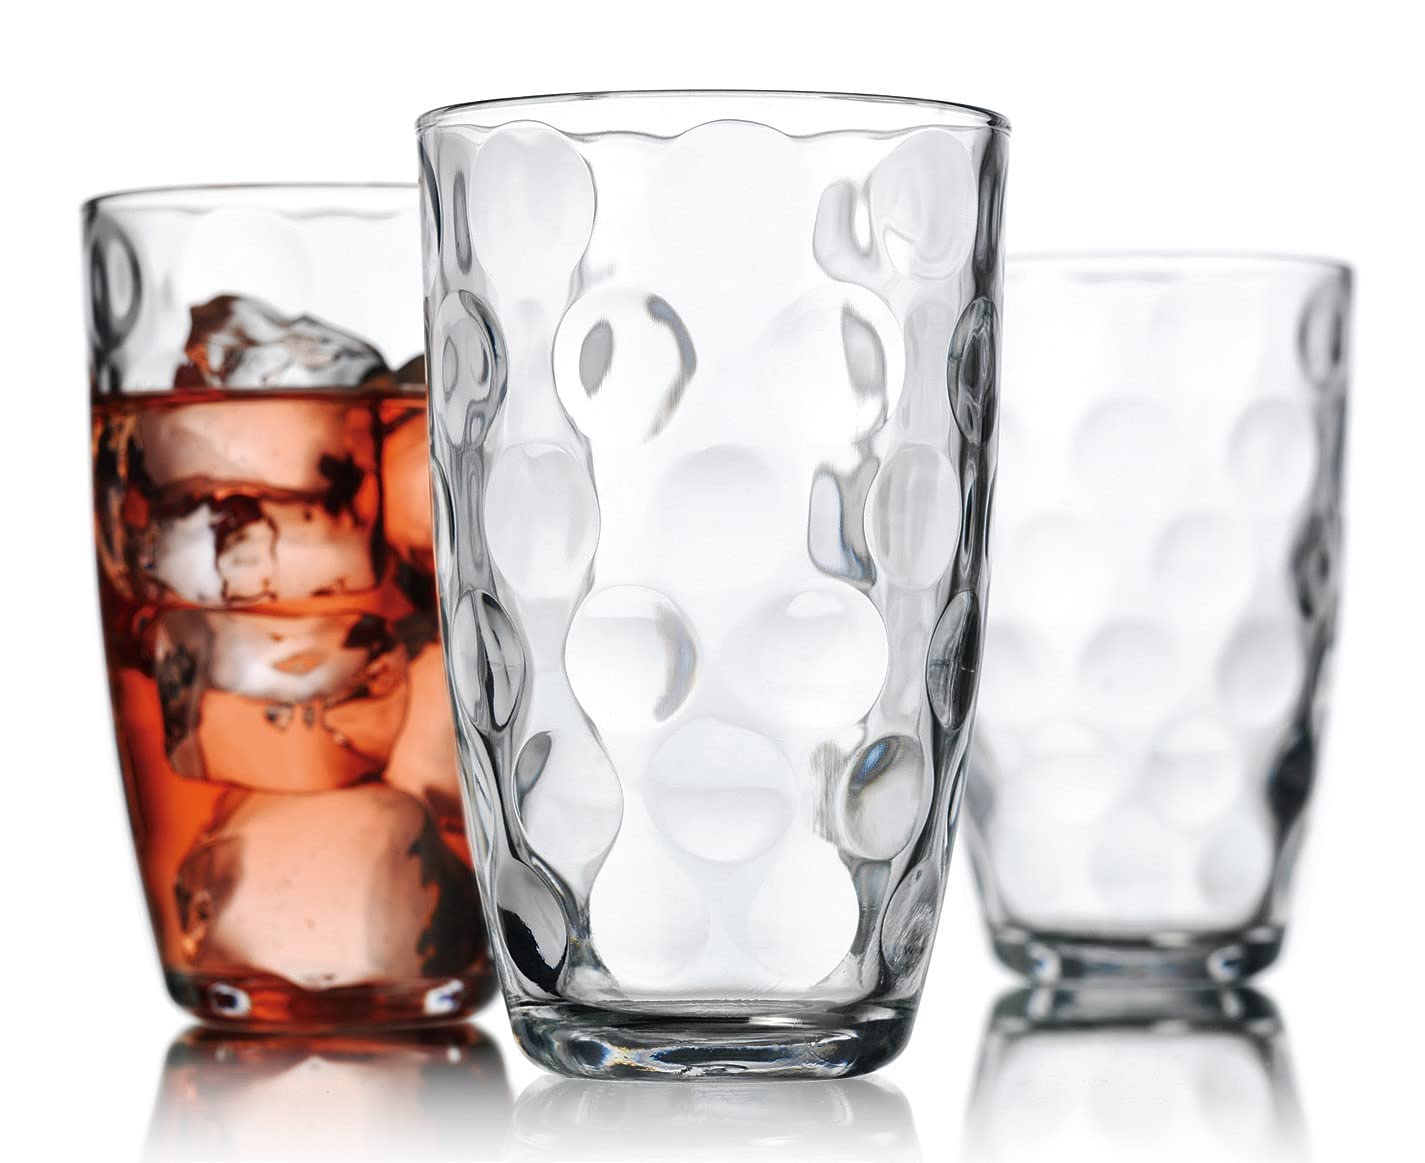 Glaver's Drinking Glasses Sized Glass Cups Sets Tumbler Beverage Set. Collins and Whiskey Glasses for Water, Juice, and Cocktail. Barware and Everyday Home Use.  - Like New